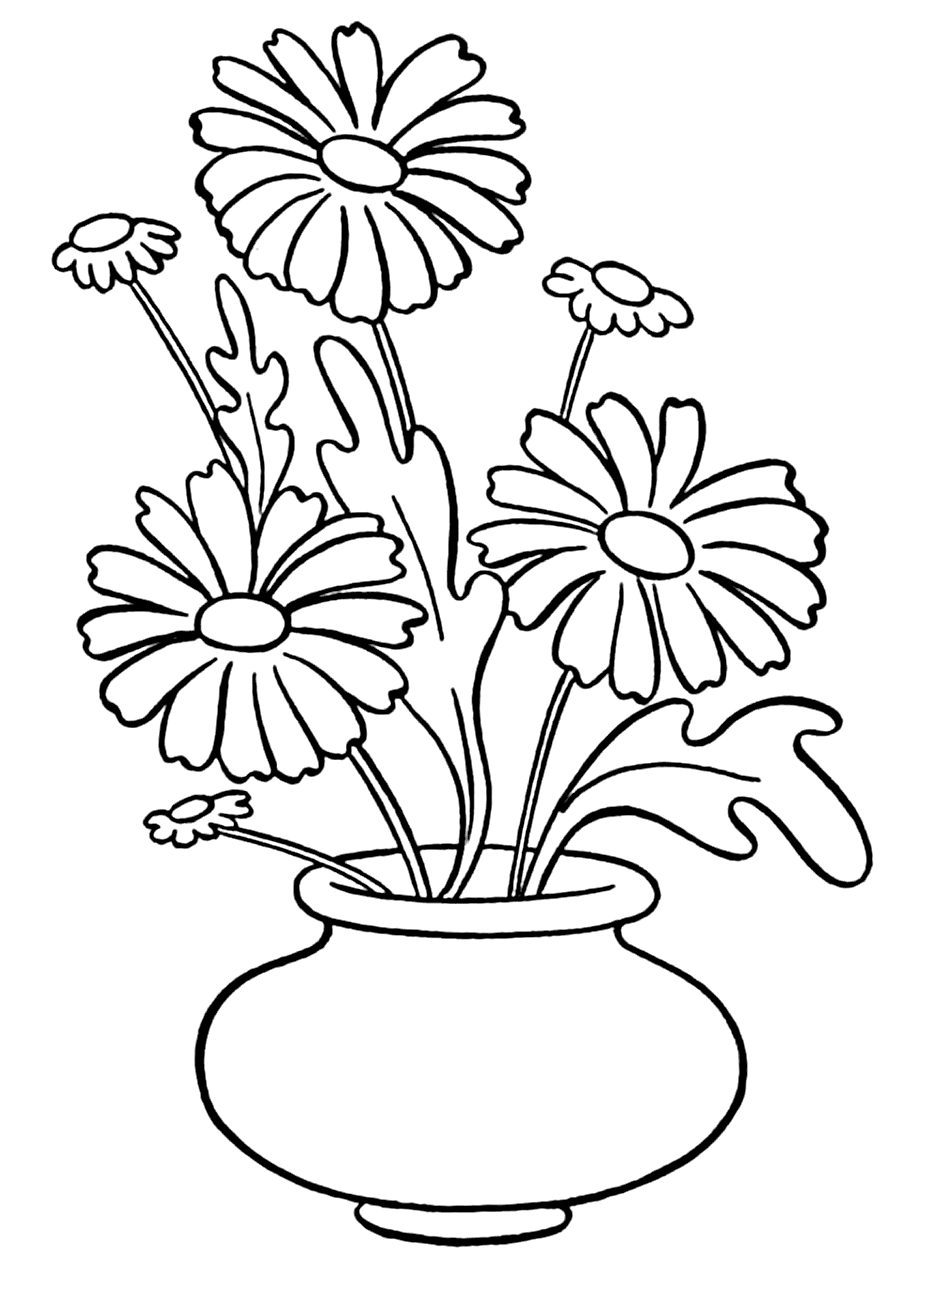 Daisies In A Vase Coloring Page